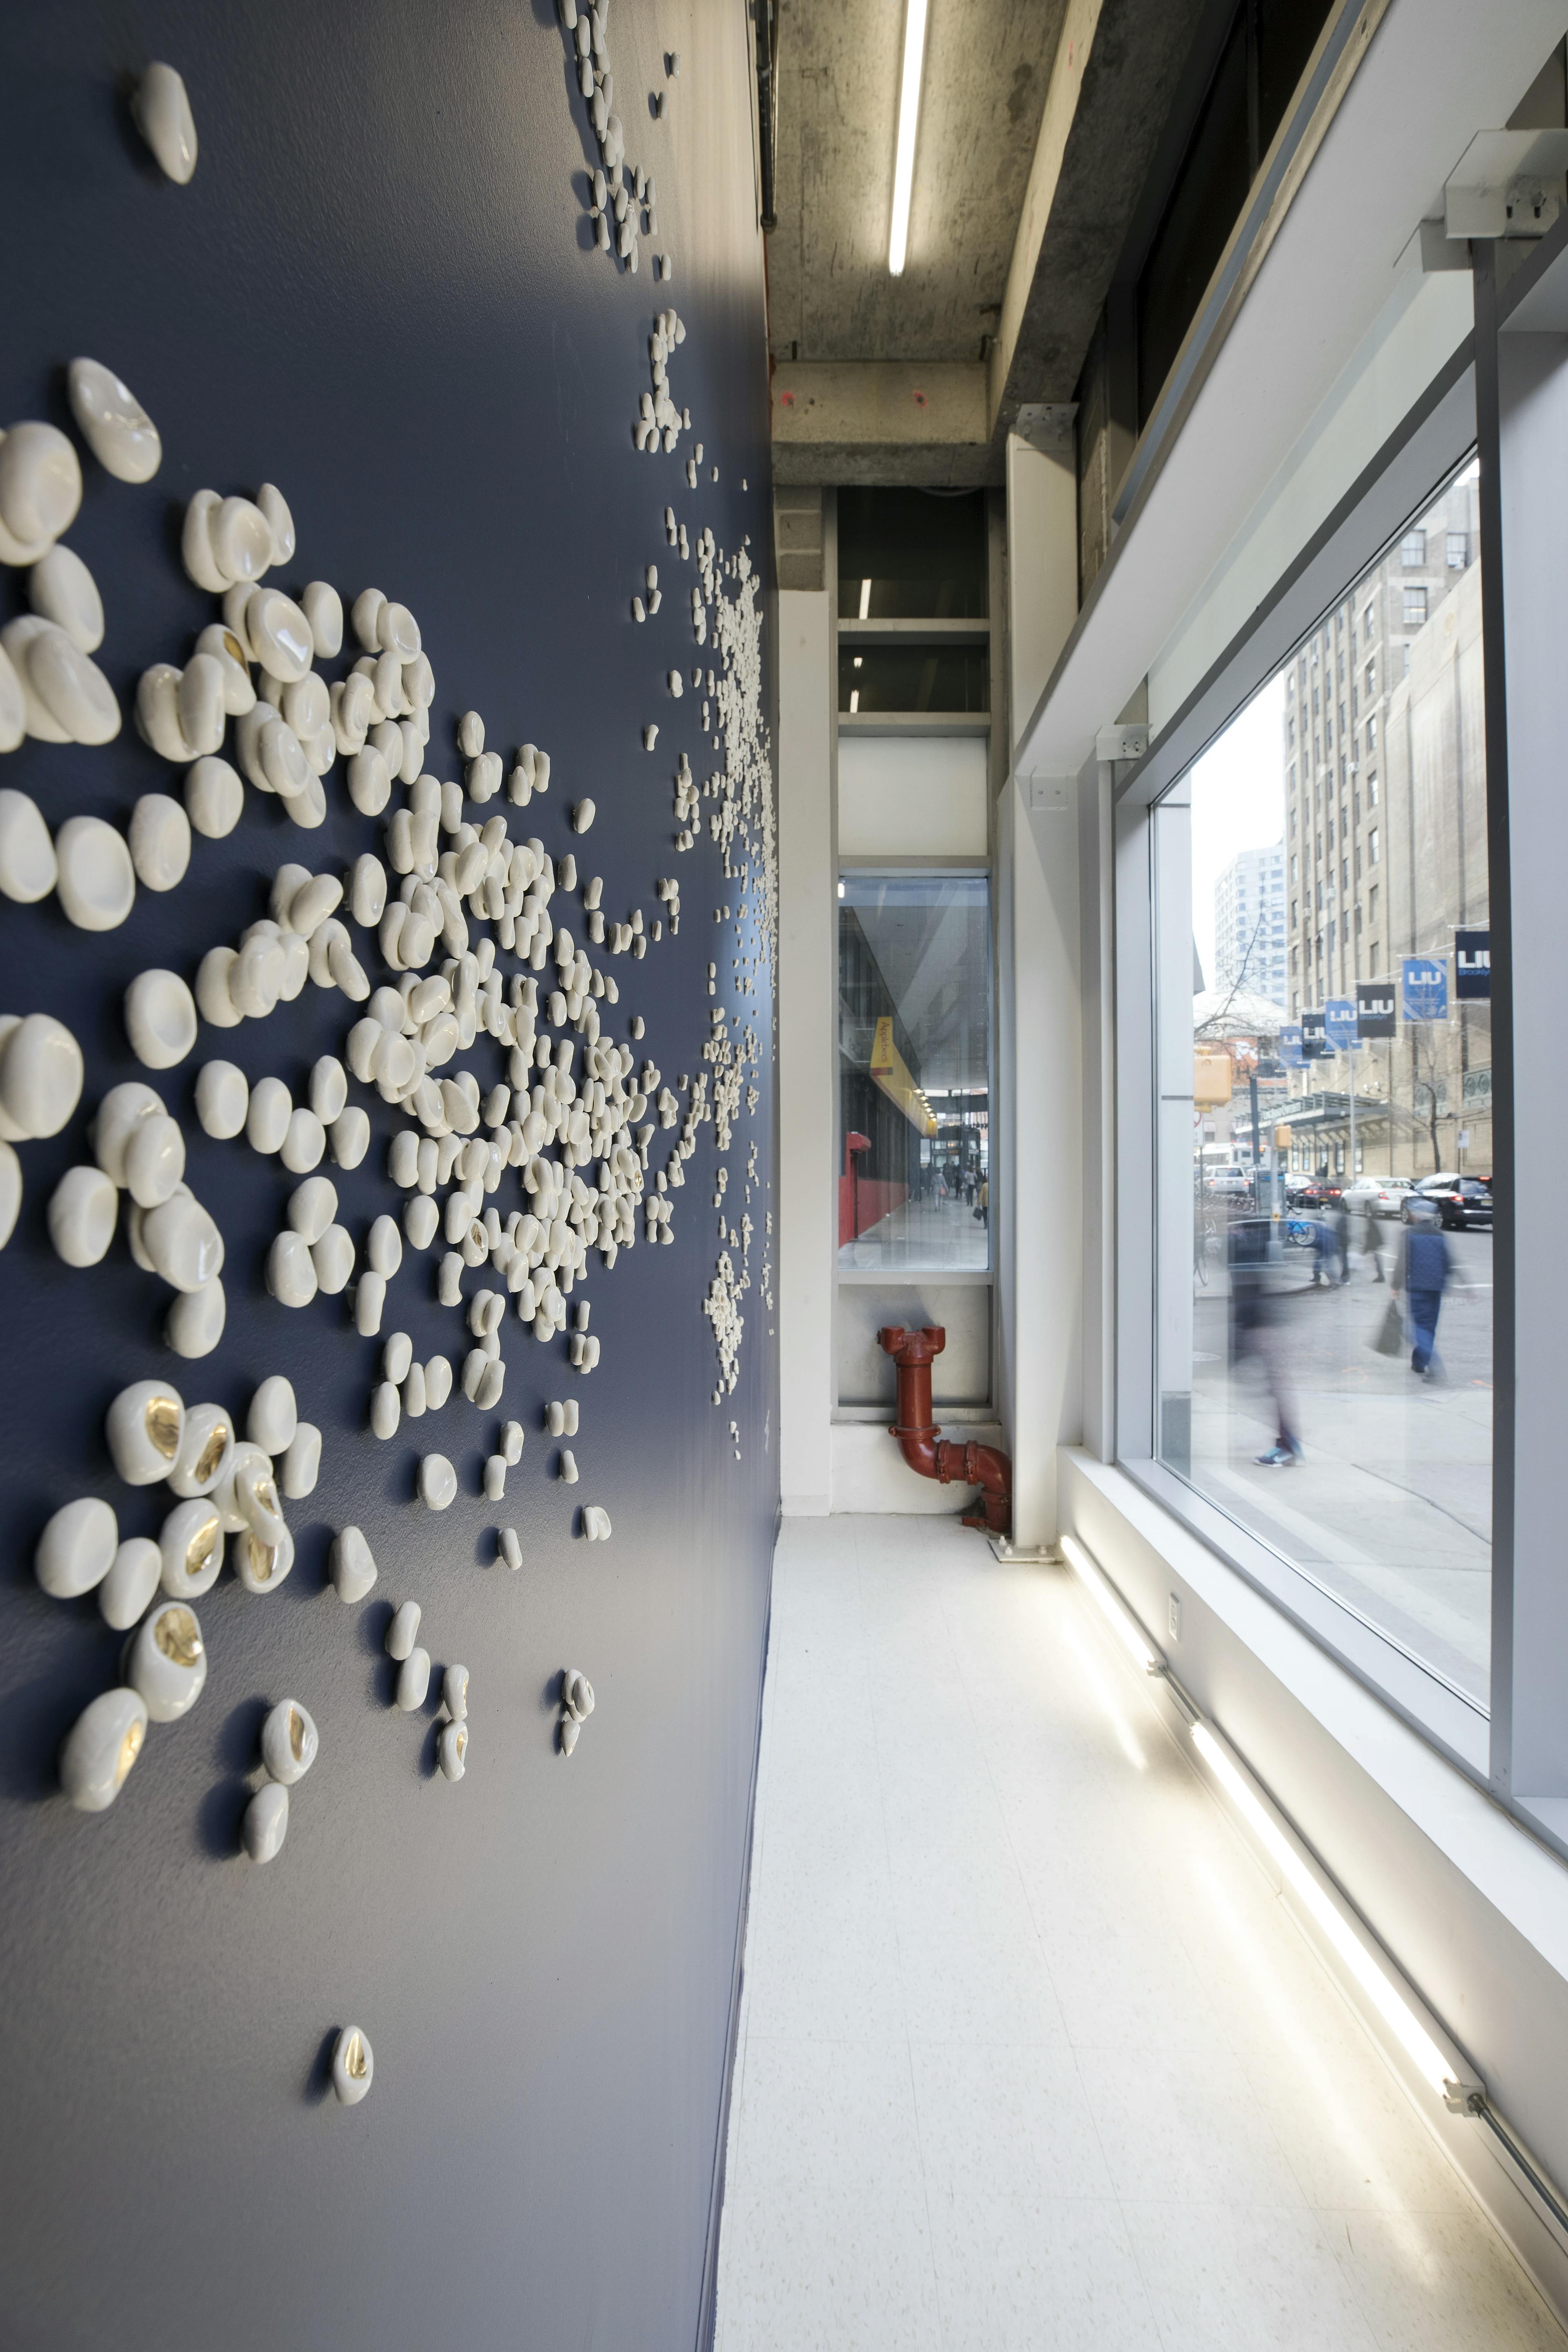 Close-up of individual white porcelain pieces, as part of a custom wall installation by artist Christina Watka.